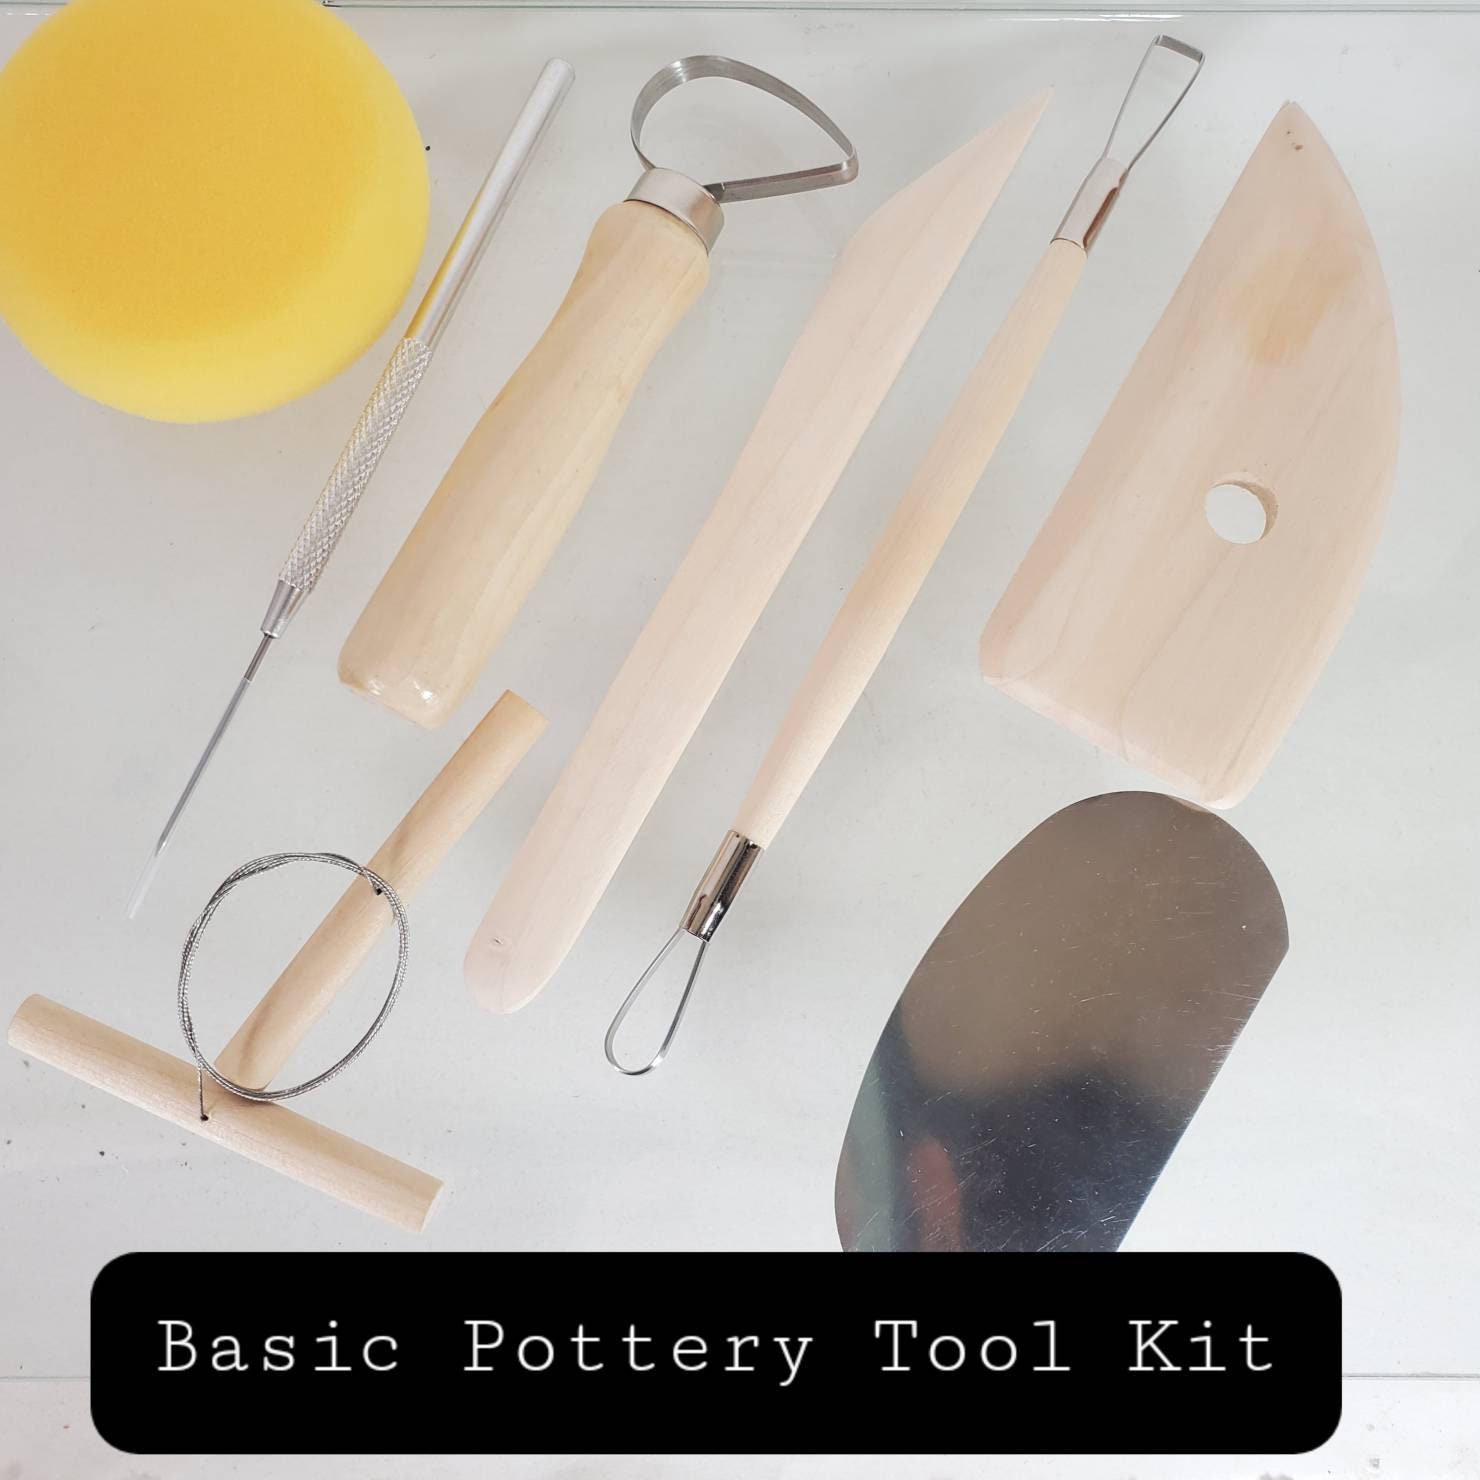 Pottery Tool Kit. Ceramic DIY Craft Make Your Own Home Pottery